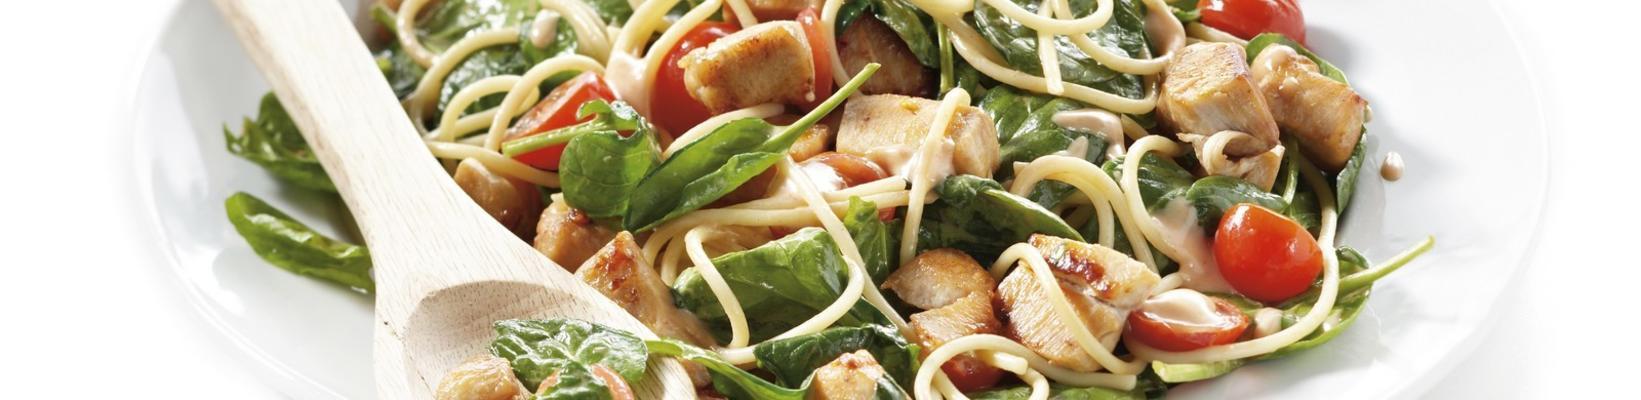 pasta salad with chicken and basil dressing